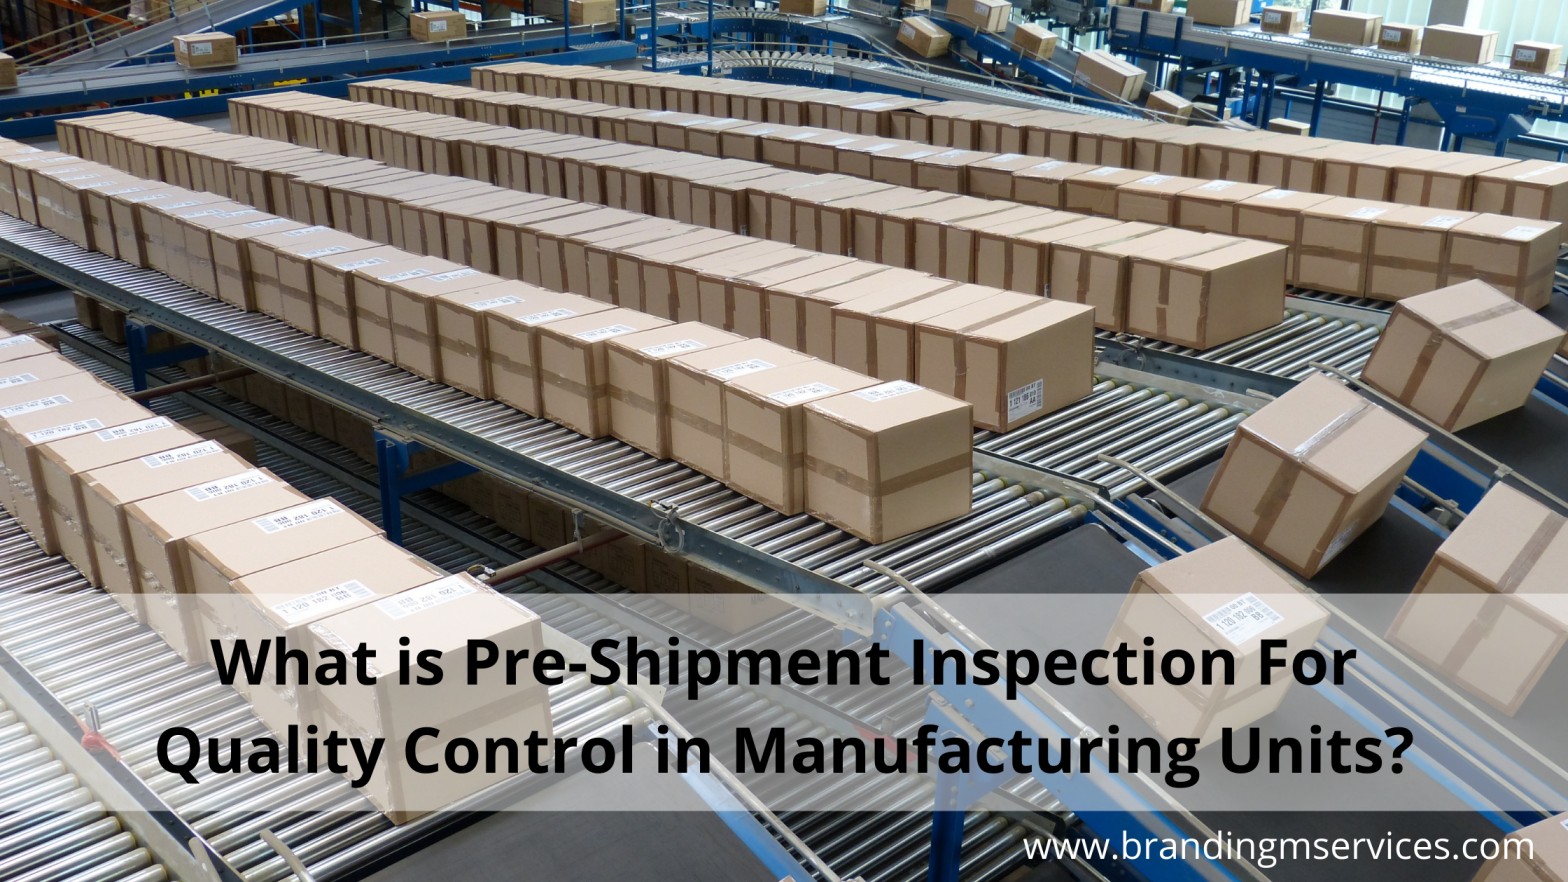 What is Pre-Shipment Inspection For Quality Control in Manufacturing Units